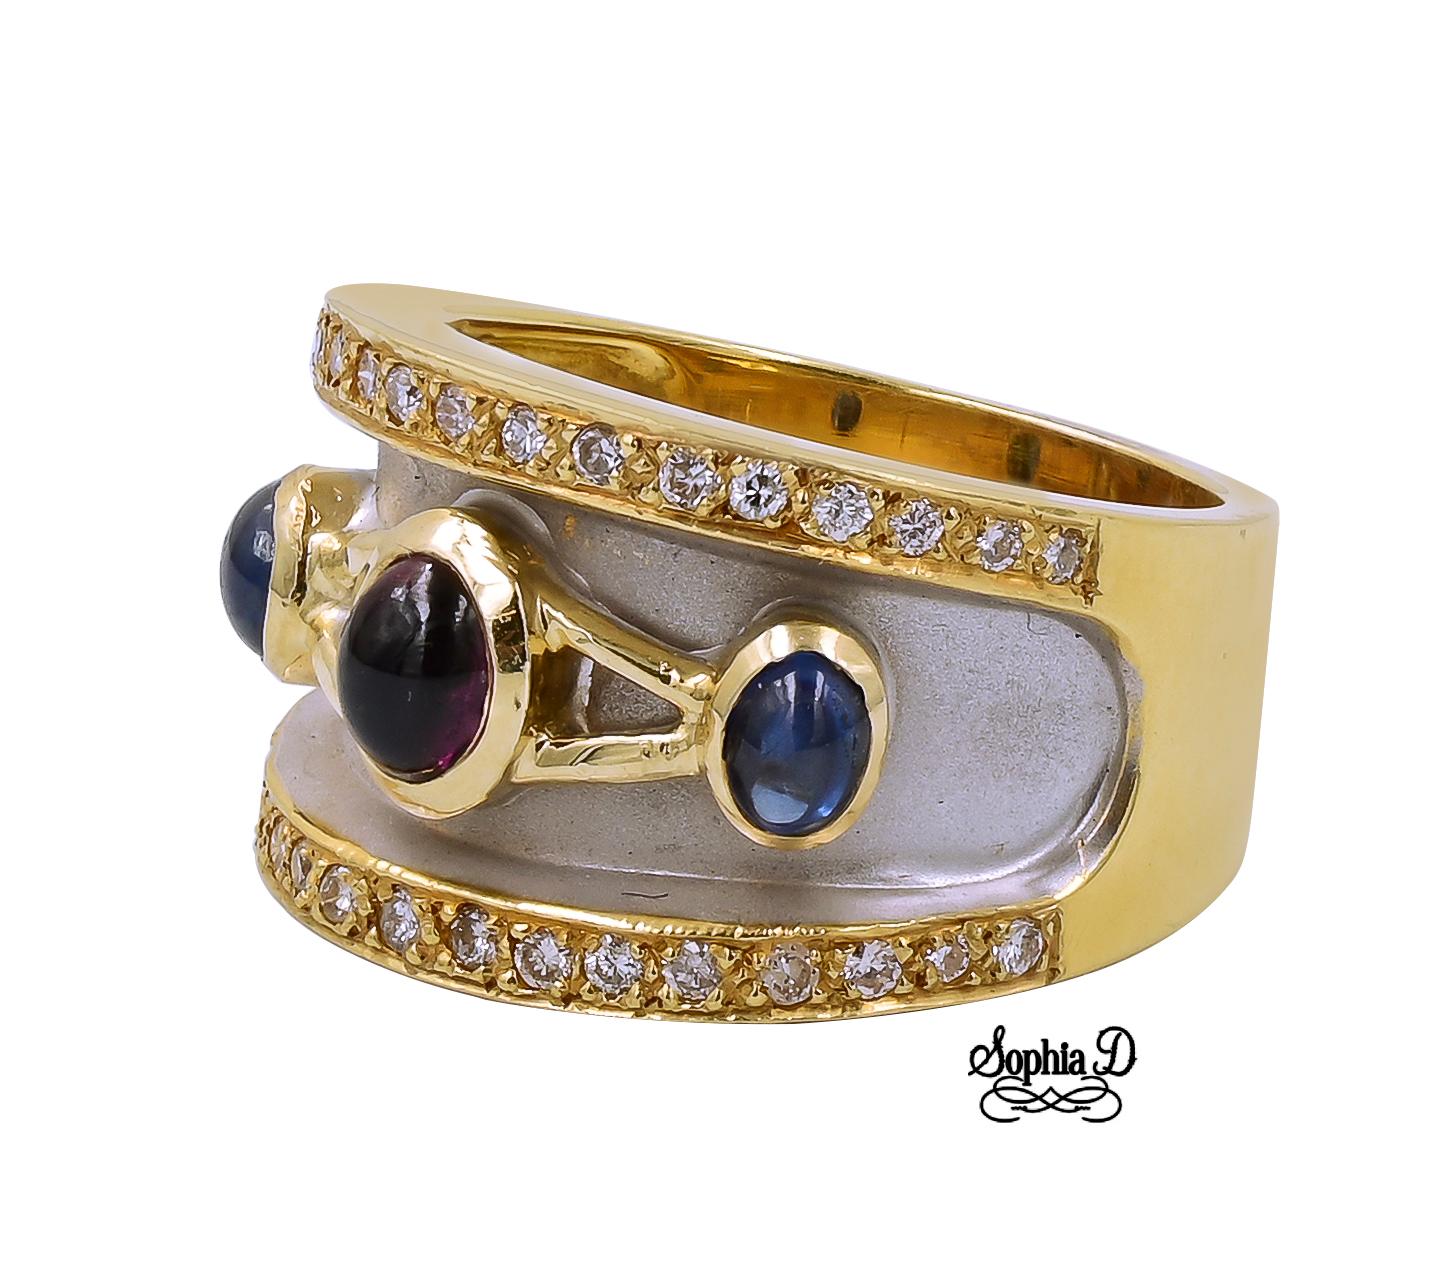 18K yellow gold ring with sapphire, ruby and diamond.

Sophia D by Joseph Dardashti LTD has been known worldwide for 35 years and are inspired by classic Art Deco design that merges with modern manufacturing techniques.  